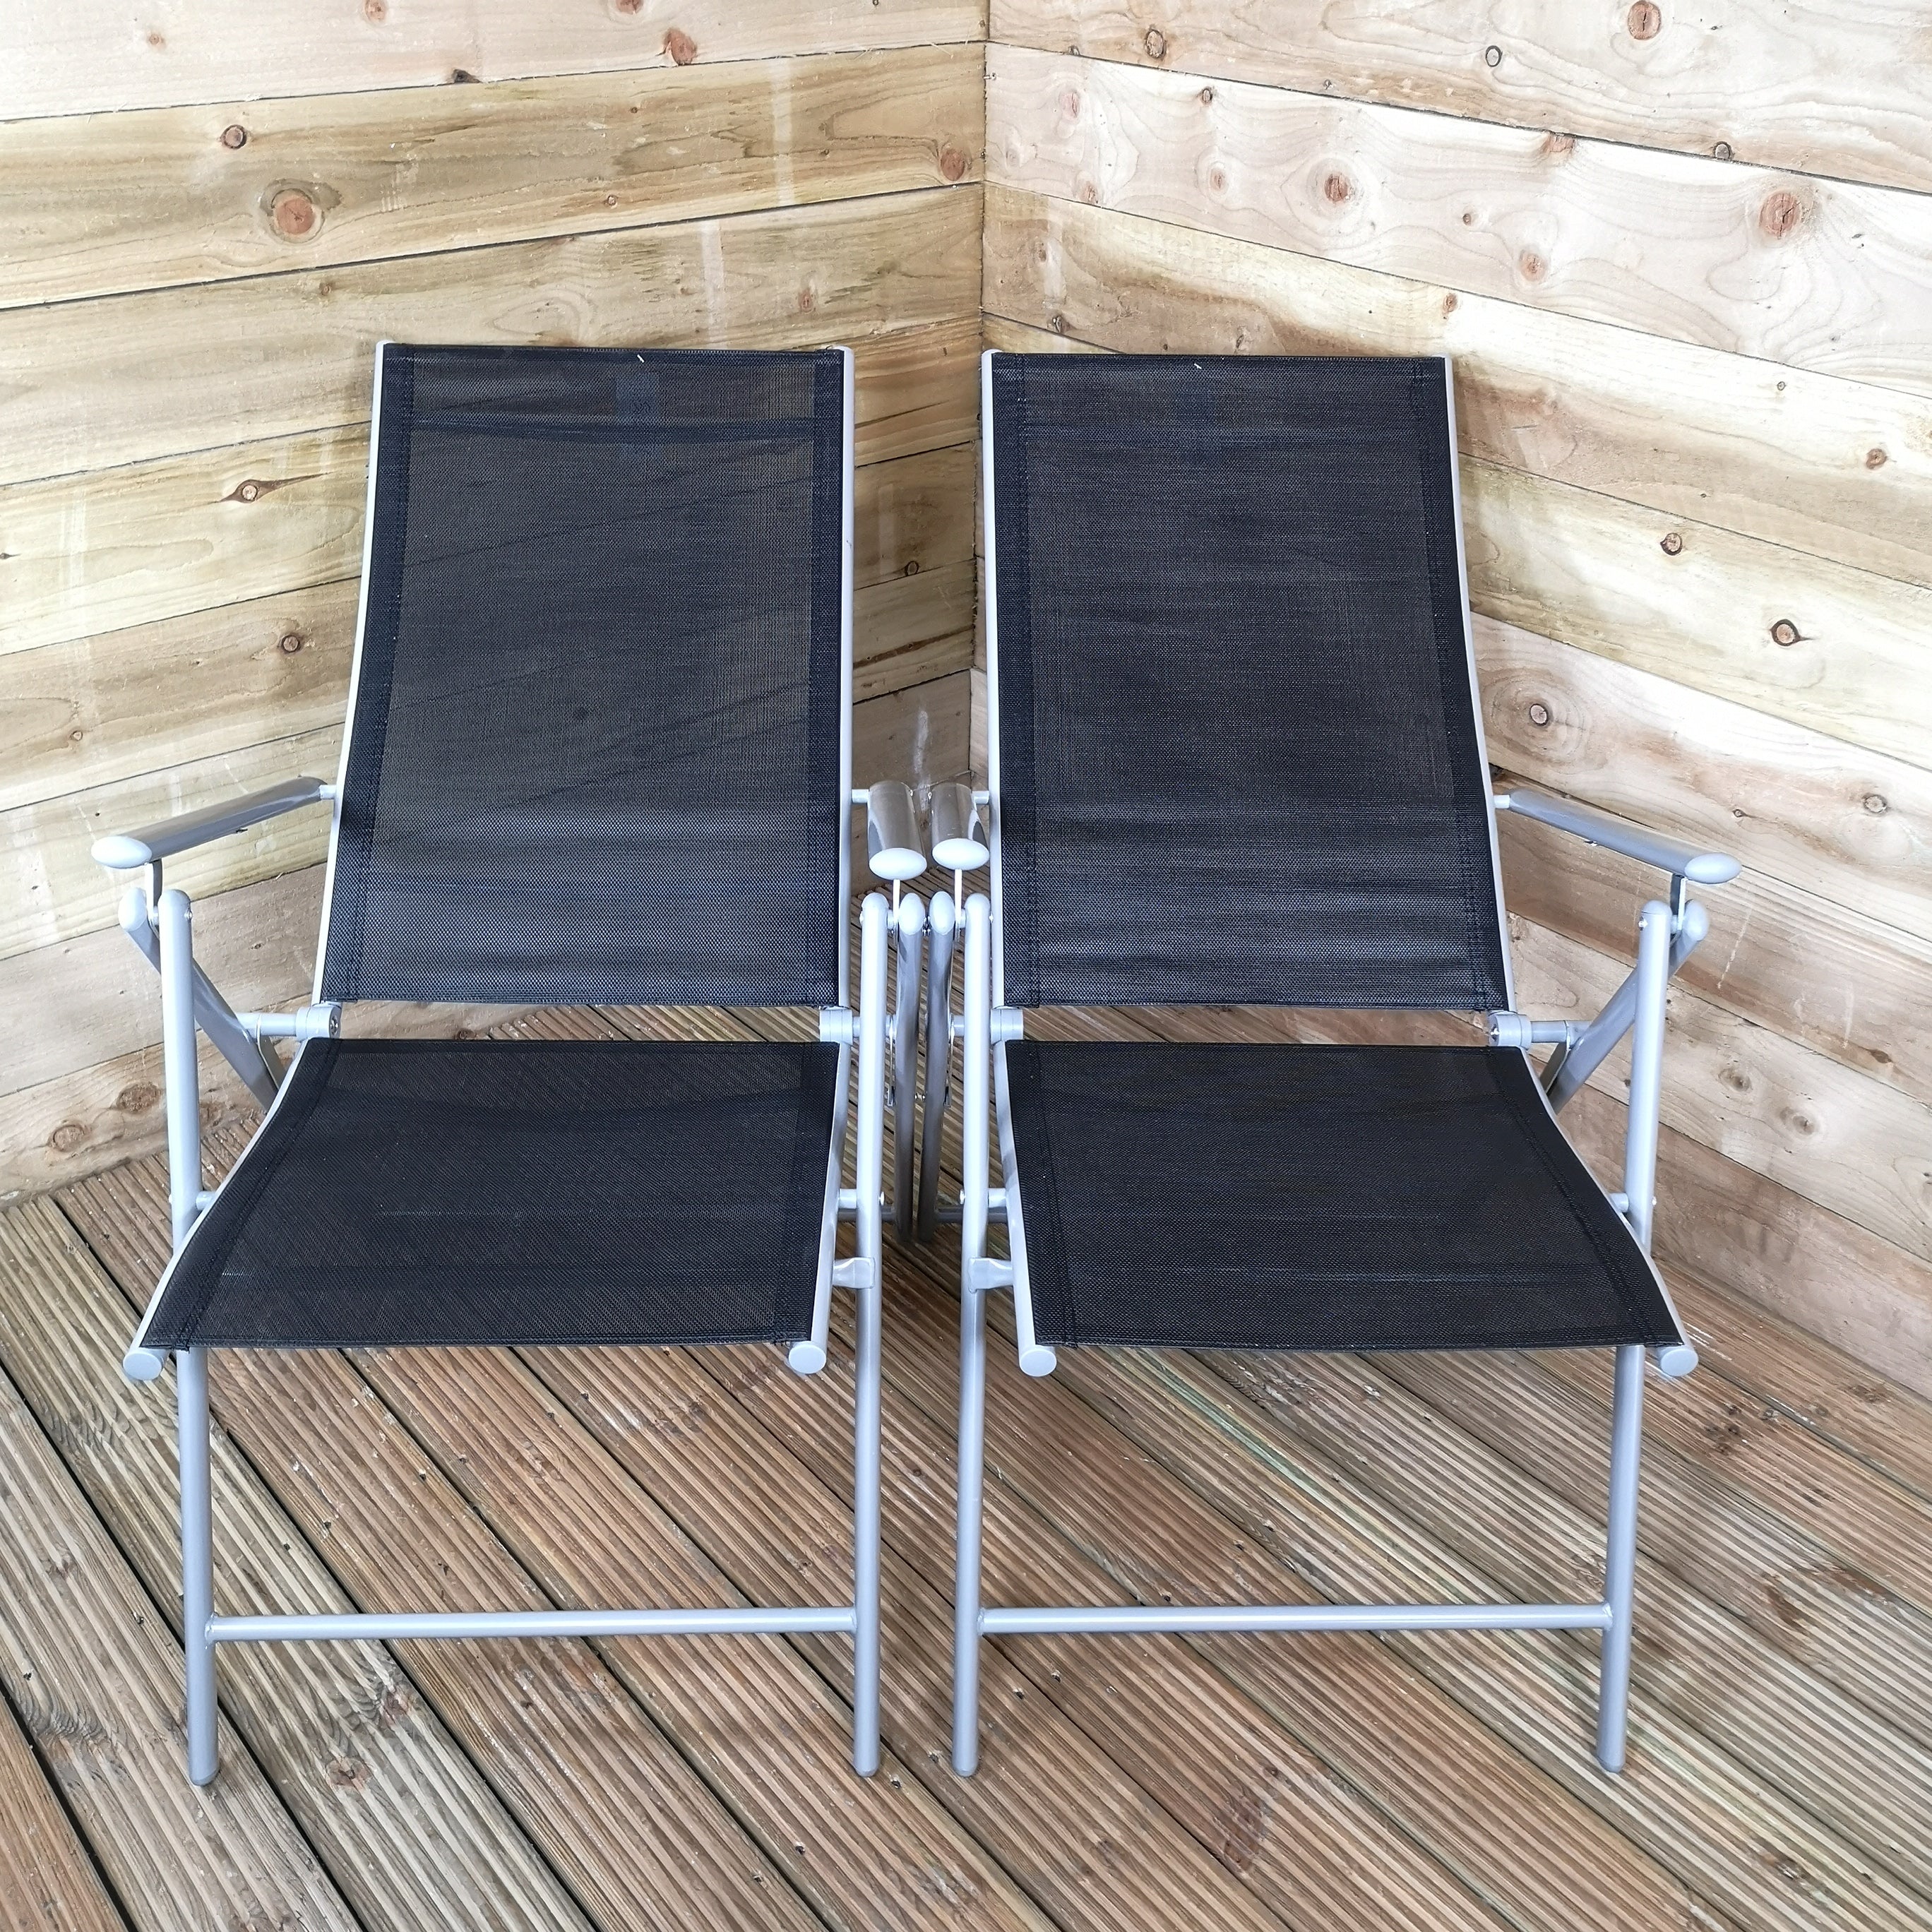 2 x Multi Position High Back Reclining Garden / Outdoor Folding Chair in Black and Silver